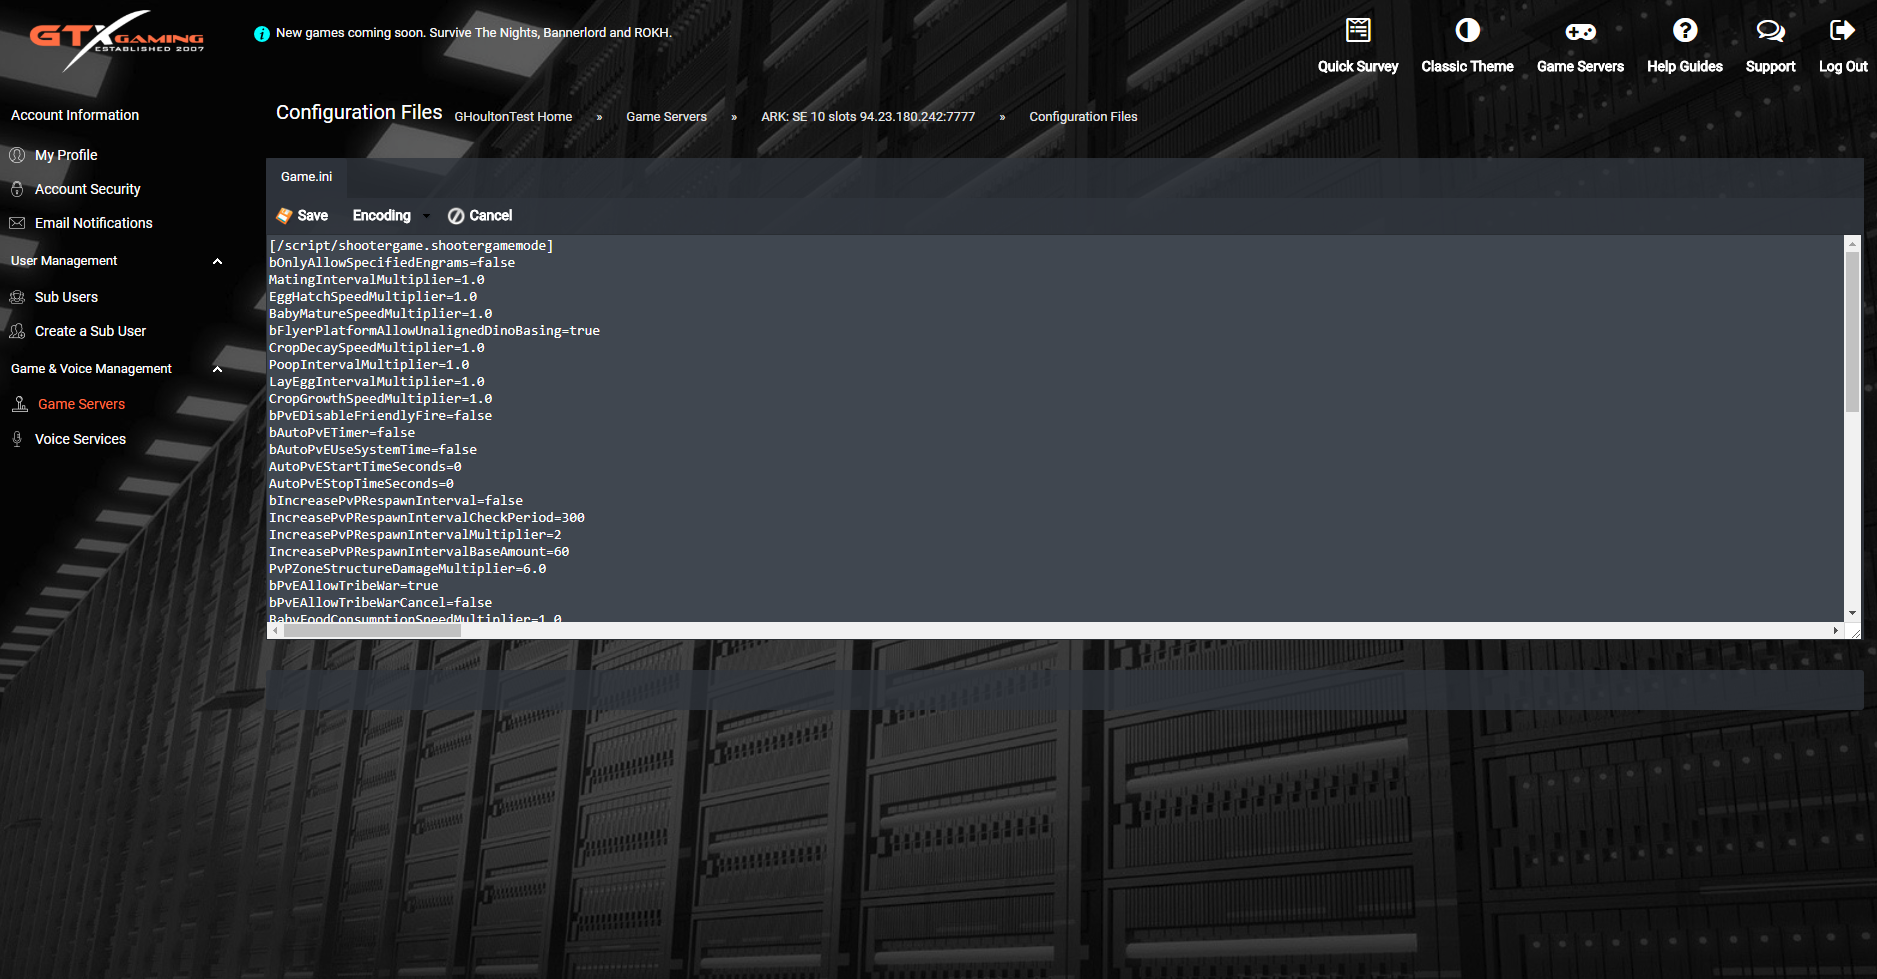 VPS/Dedicated servers with gaming ready webinterface